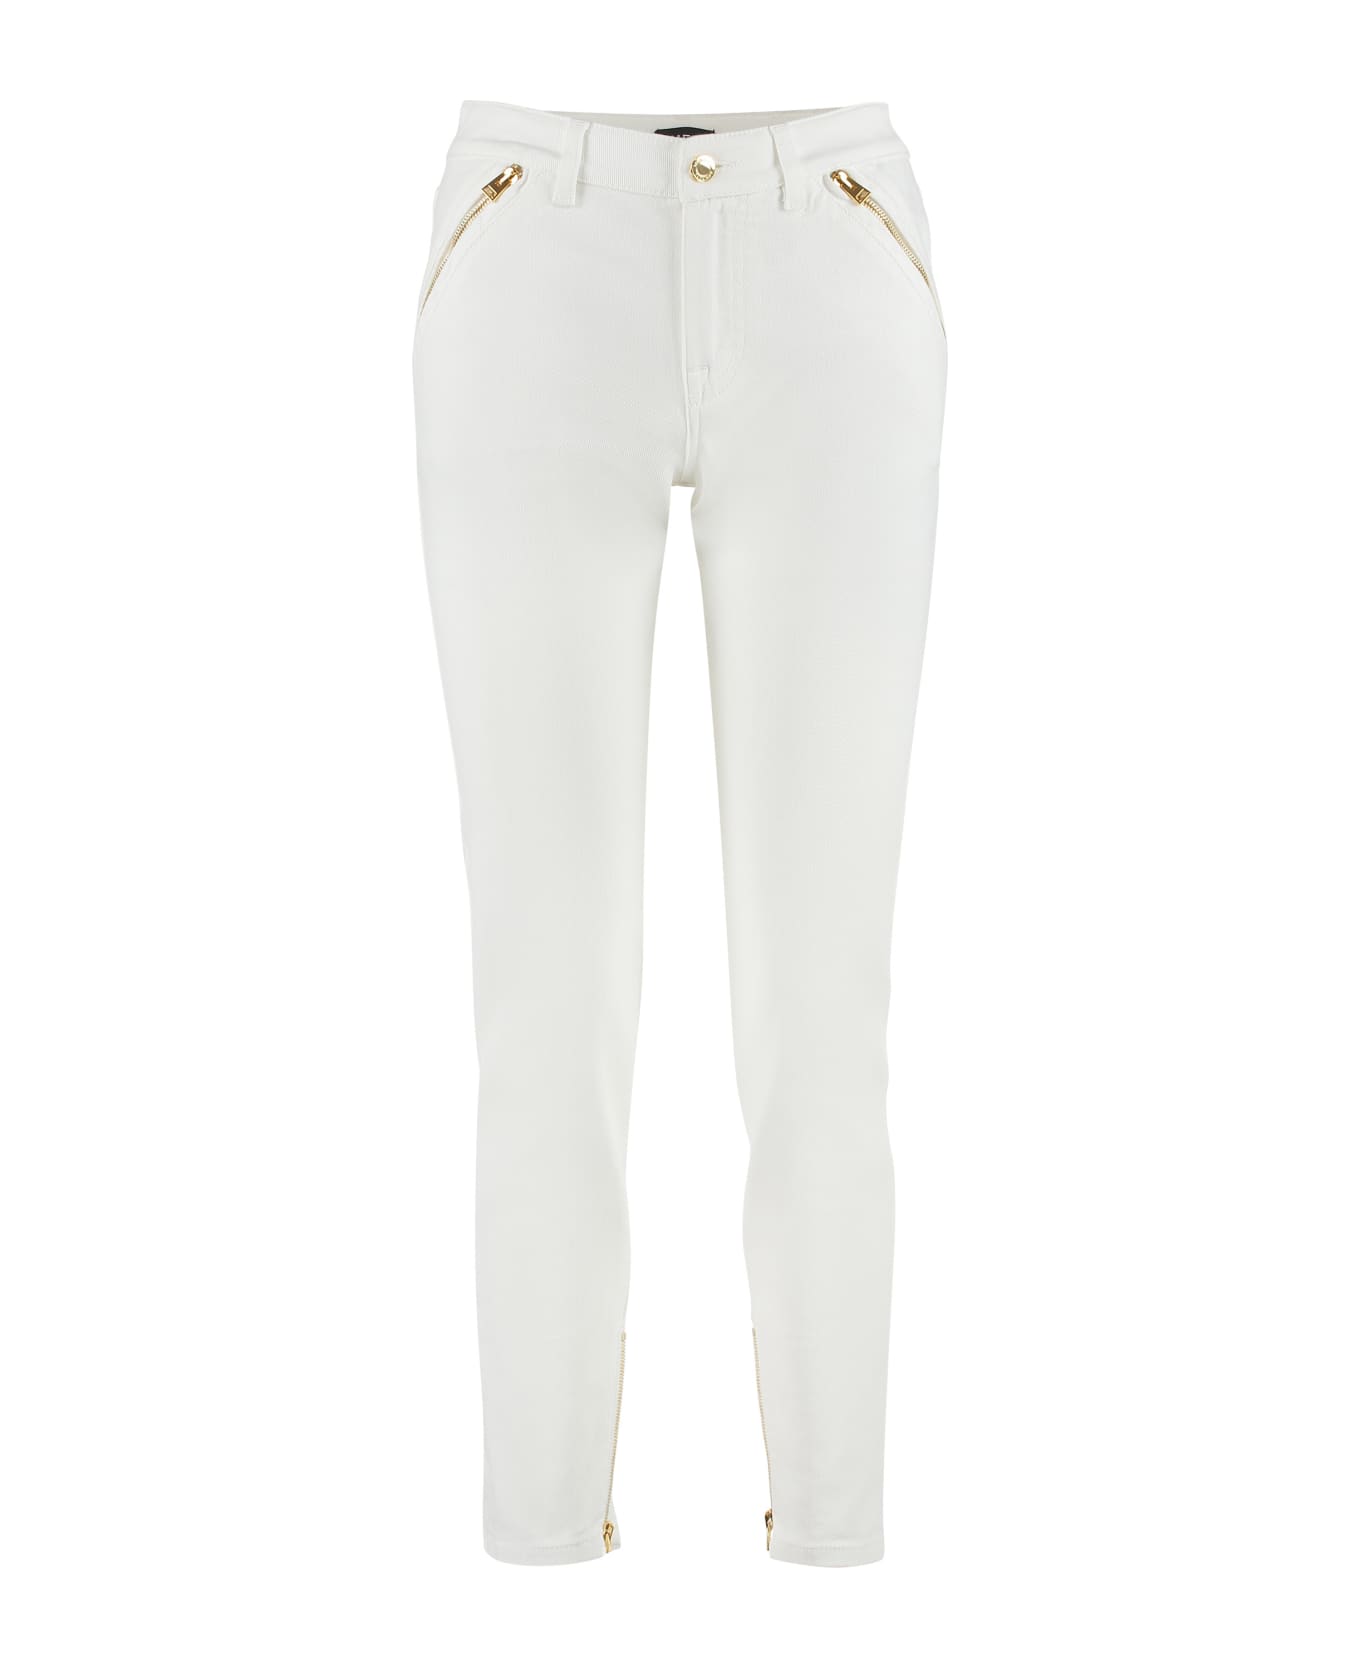 Tom Ford High-rise Skinny-fit Jeans - White